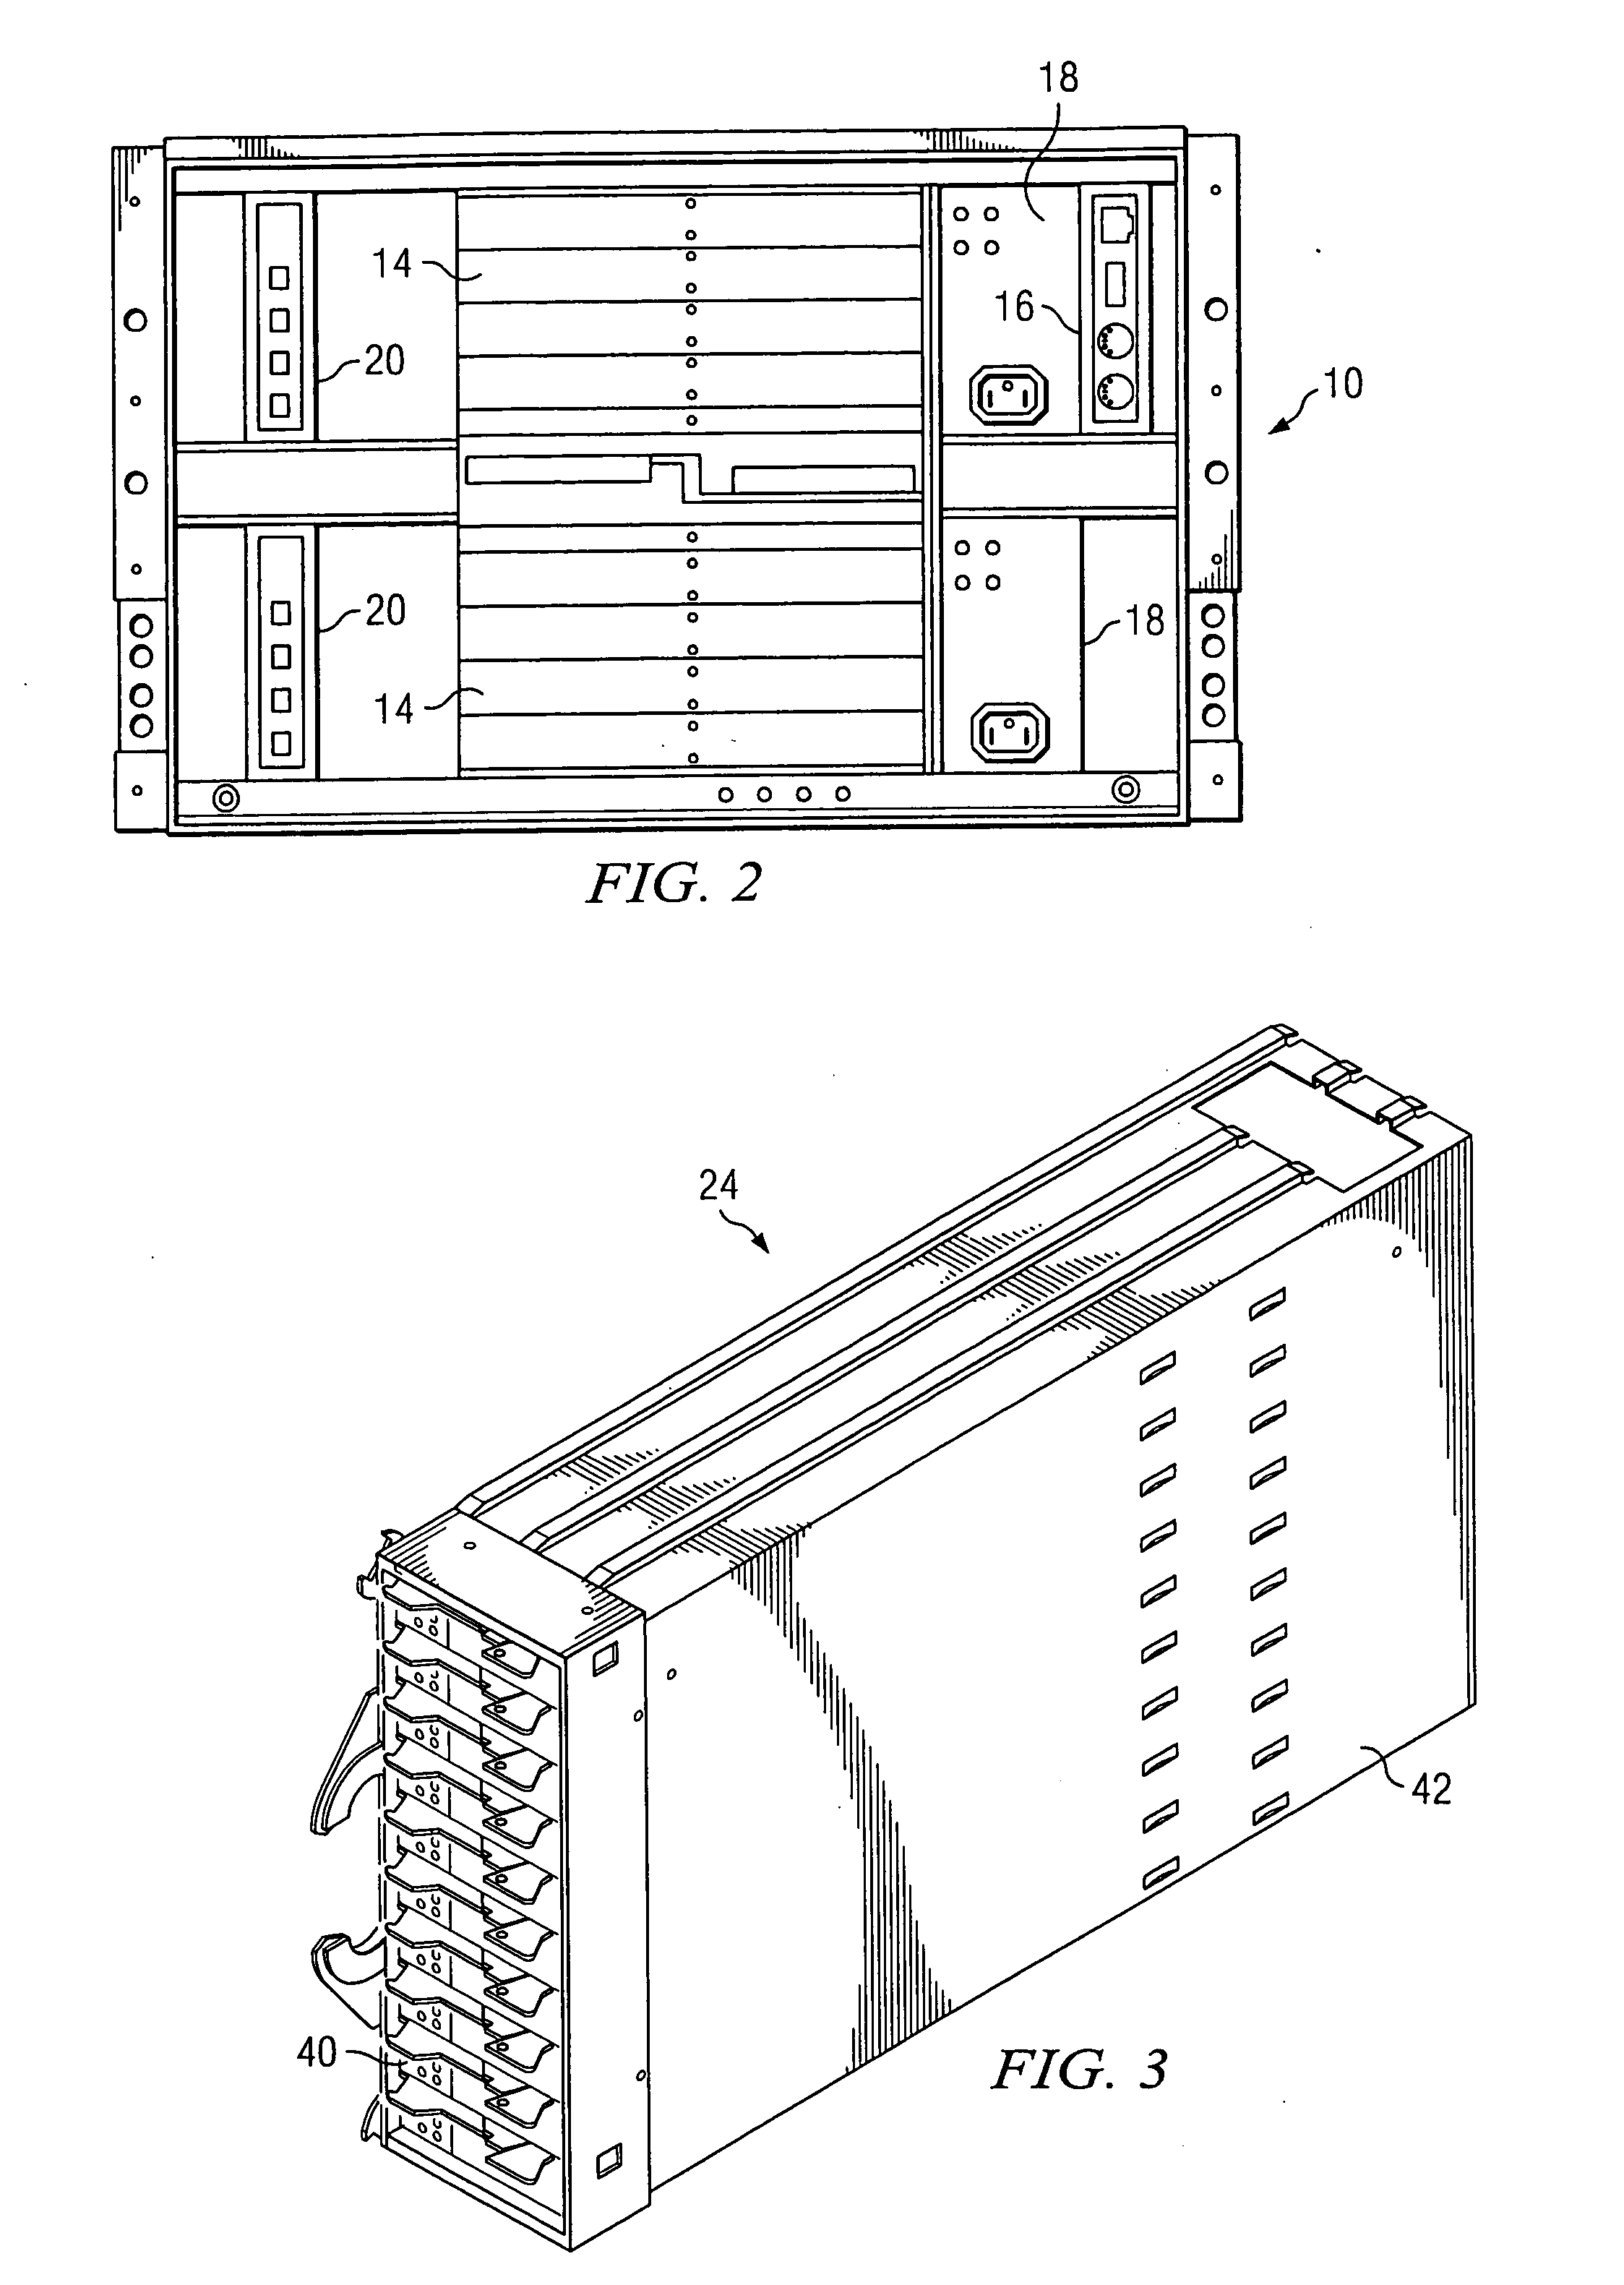 Damping rotational vibration in a multi-drive tray